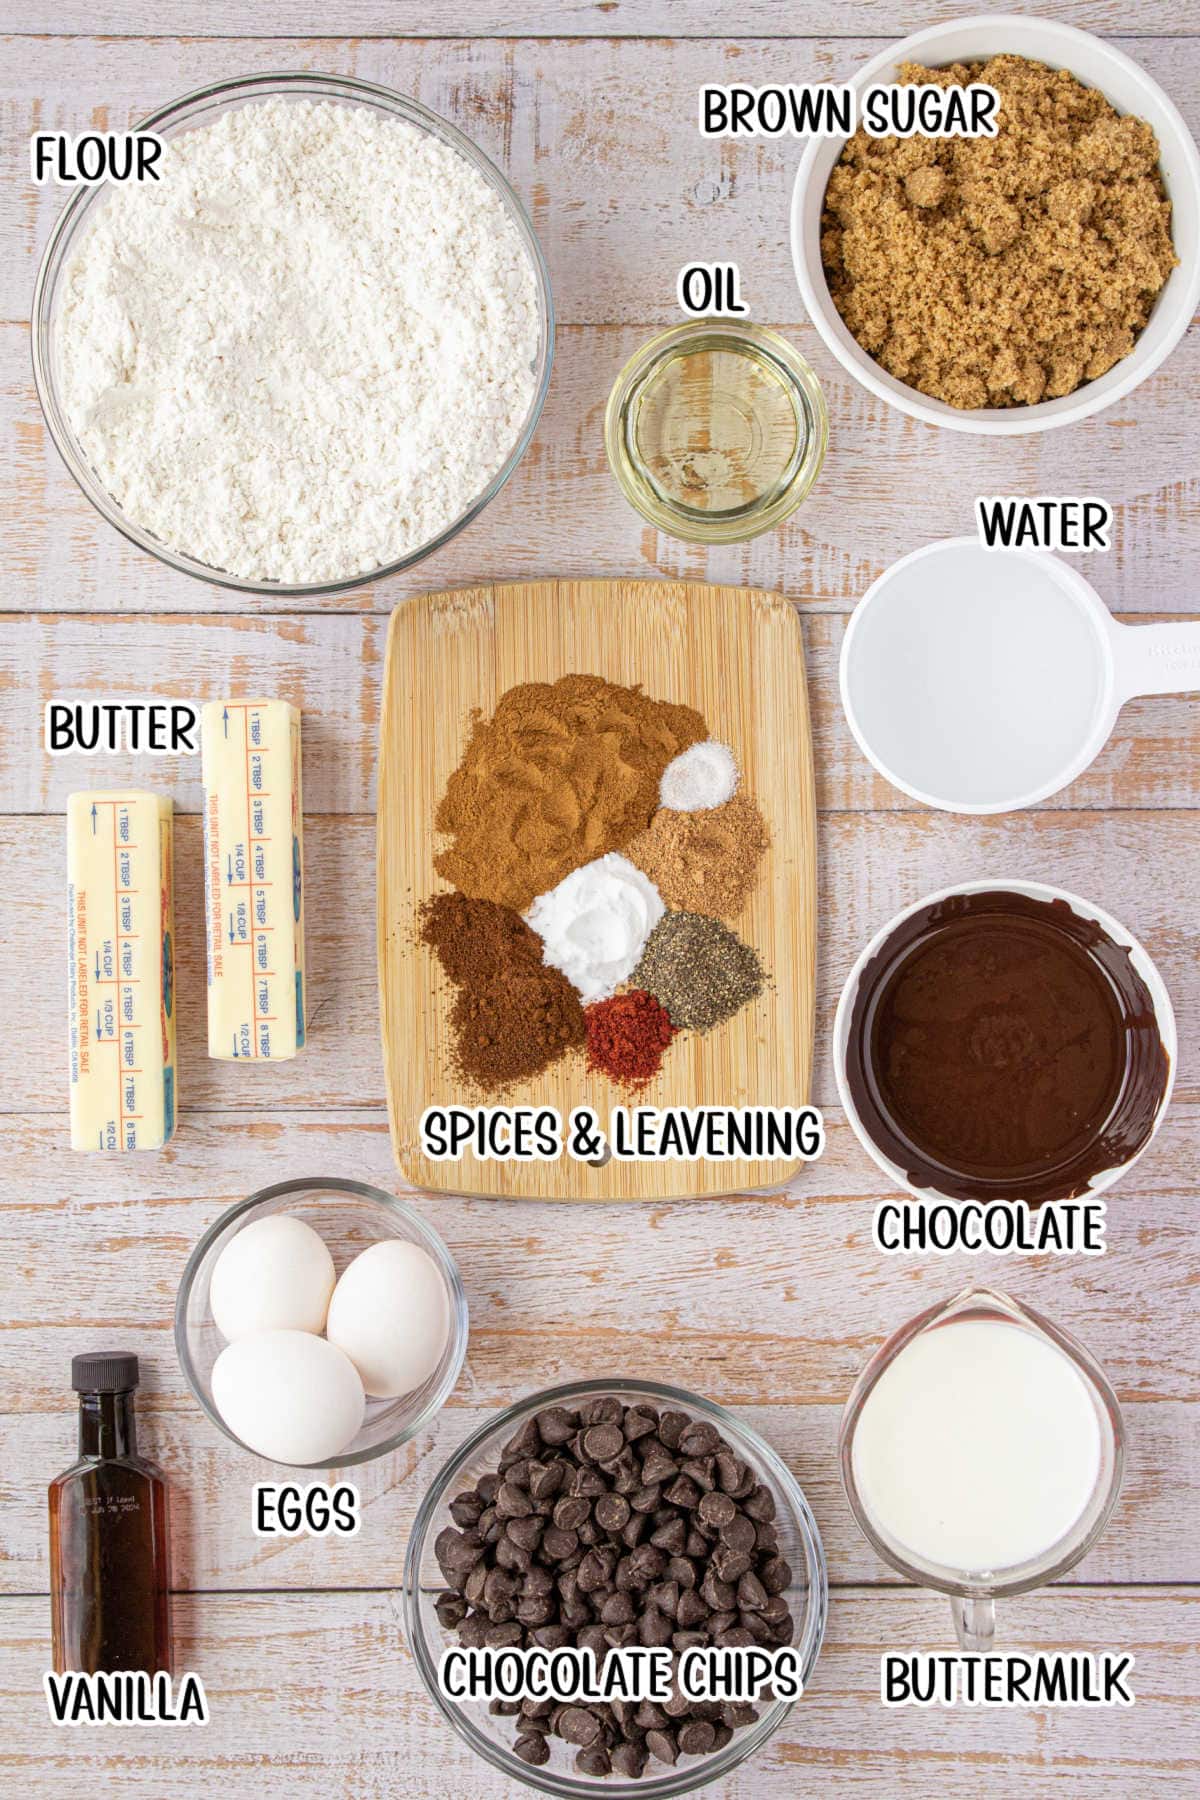 Labeled ingredients for chocolate spice cake.